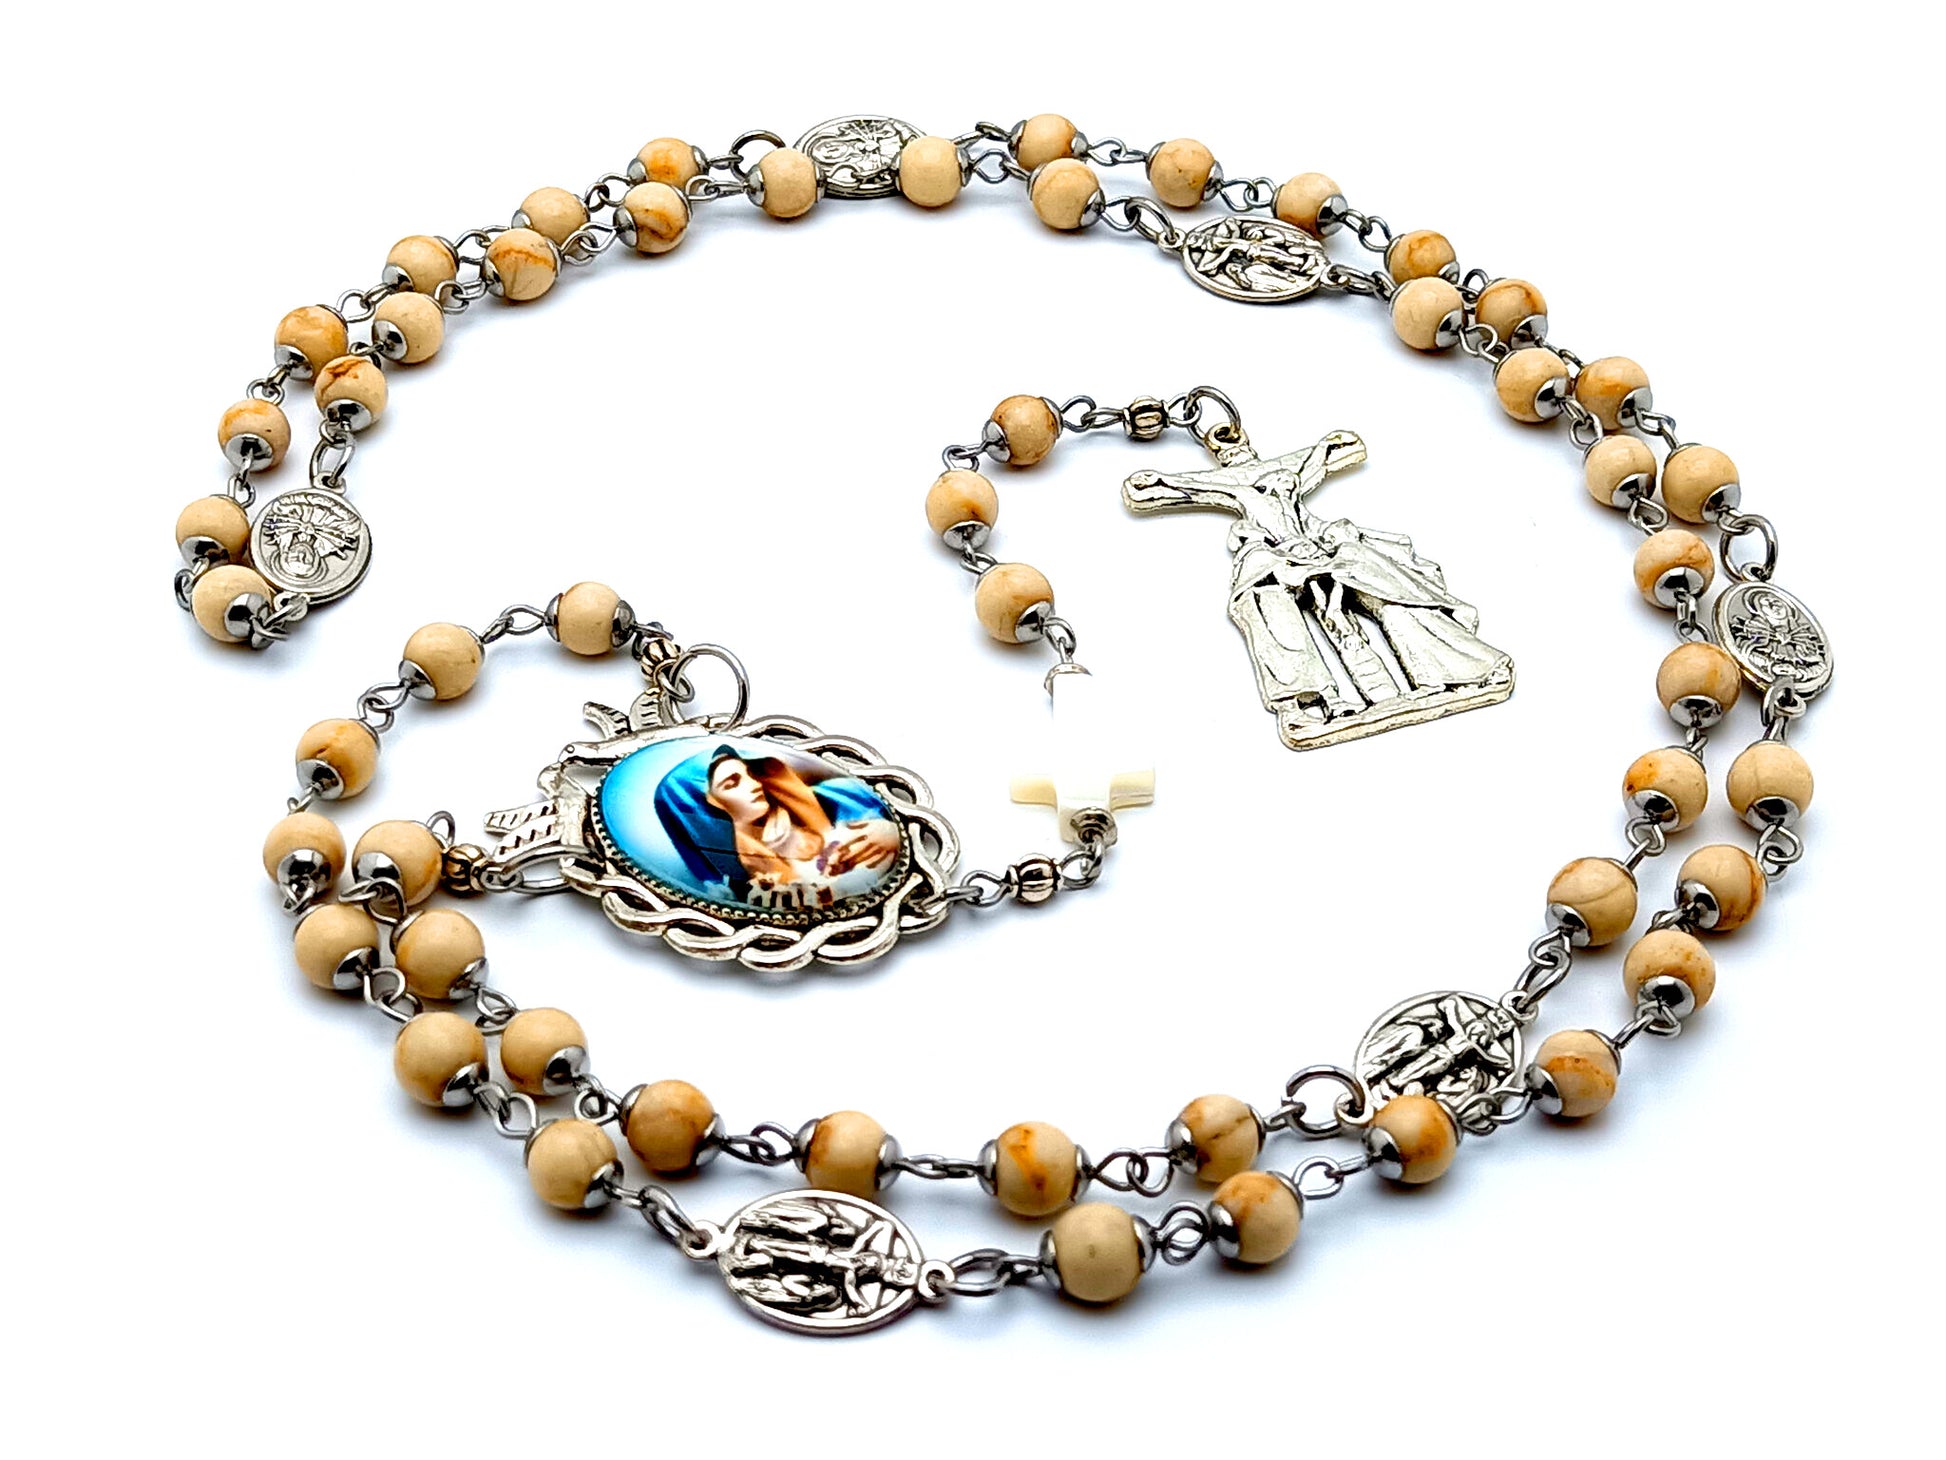 Our Lady of Sorrows unique rosary beads dolor gemstone prayer chaplet with mother of pearl cross and Saint John  and Mary crucifix with Holy Spirit medal.